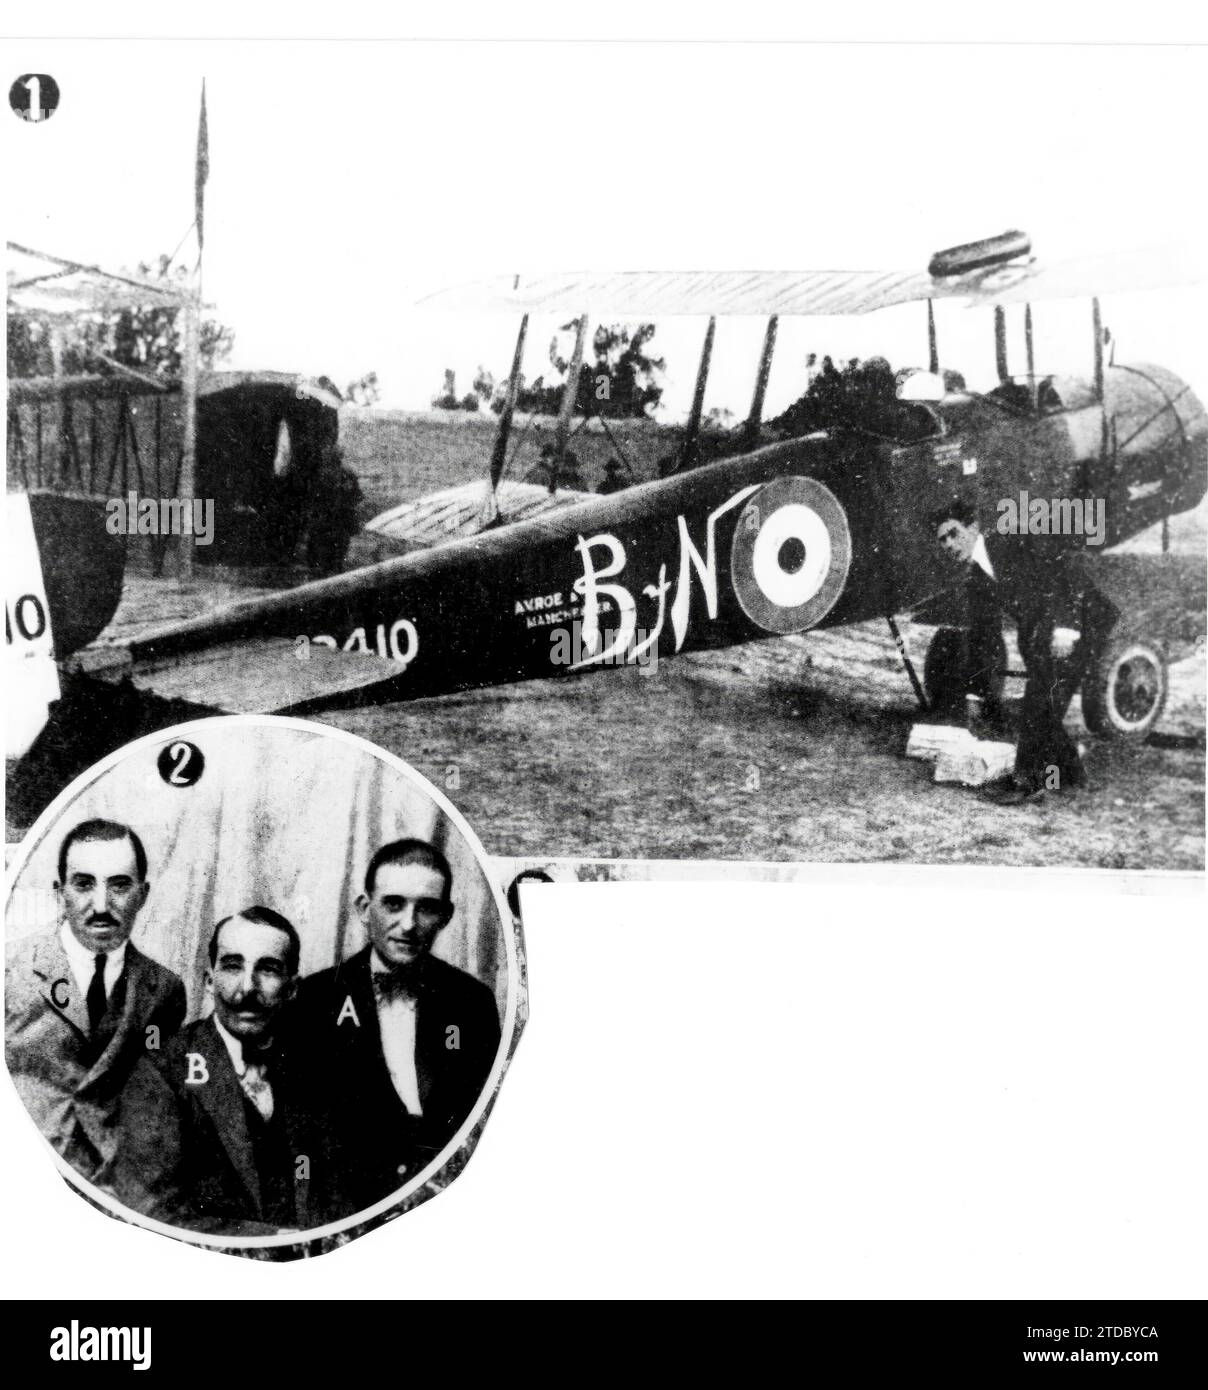 Airplane Carrying ABC Madrid-Seville - the 'Aviation Transport' Plane, with the Acronyms 'Black and White' on the fuselage Served the Seville-Madrid postal line Established in 1919. In the Circle photograph, Captain Collier, airplane pilot; The 'Graphic Reporter' Mr. Zegri, and Captain Matanzas, then head of the Seville aerodrome - Approximate date. Credit: Album / Archivo ABC Stock Photo